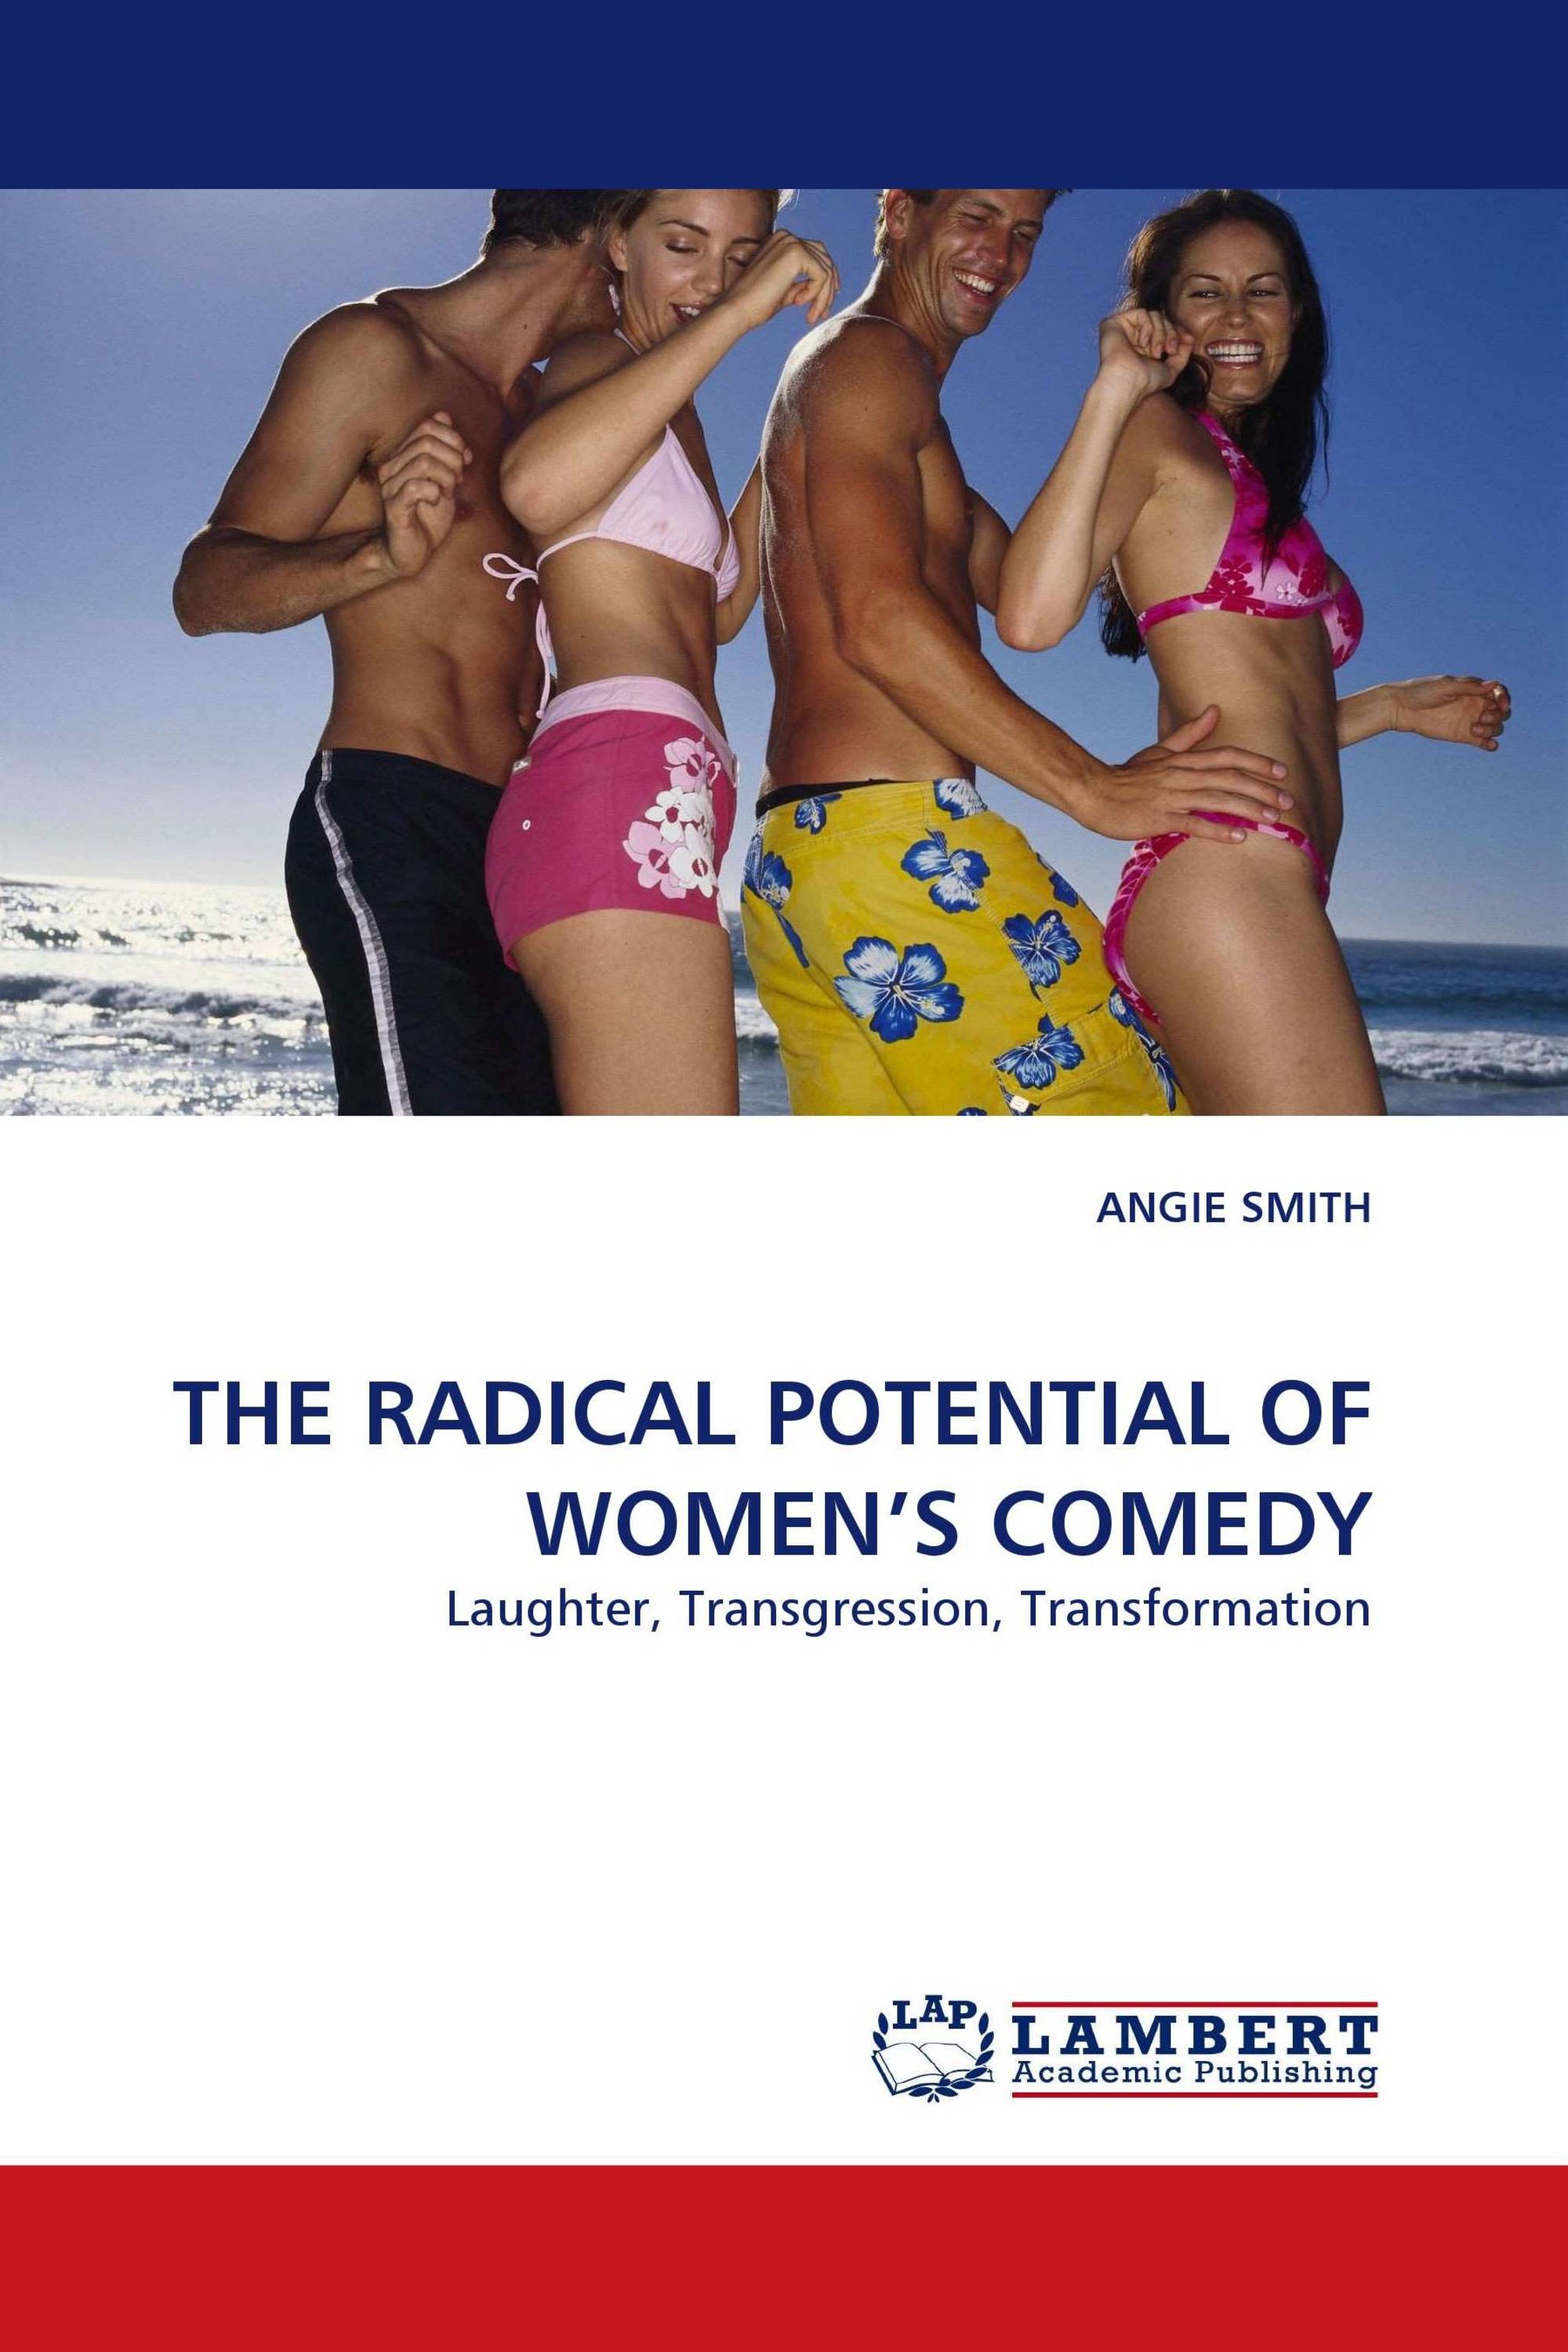 THE RADICAL POTENTIAL OF WOMEN’S COMEDY